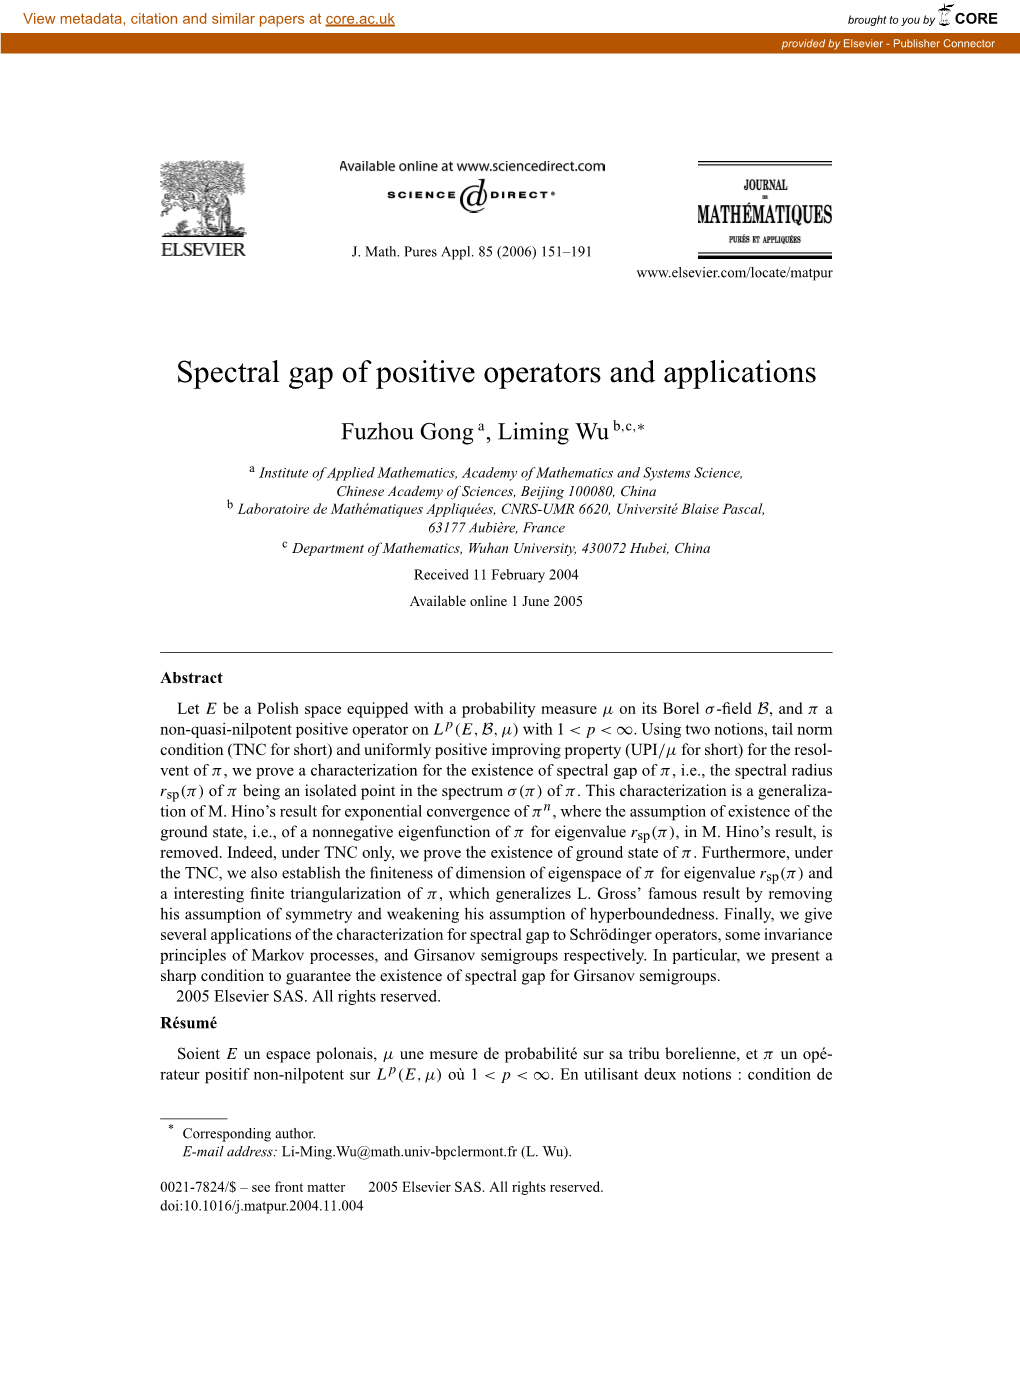 Spectral Gap of Positive Operators and Applications